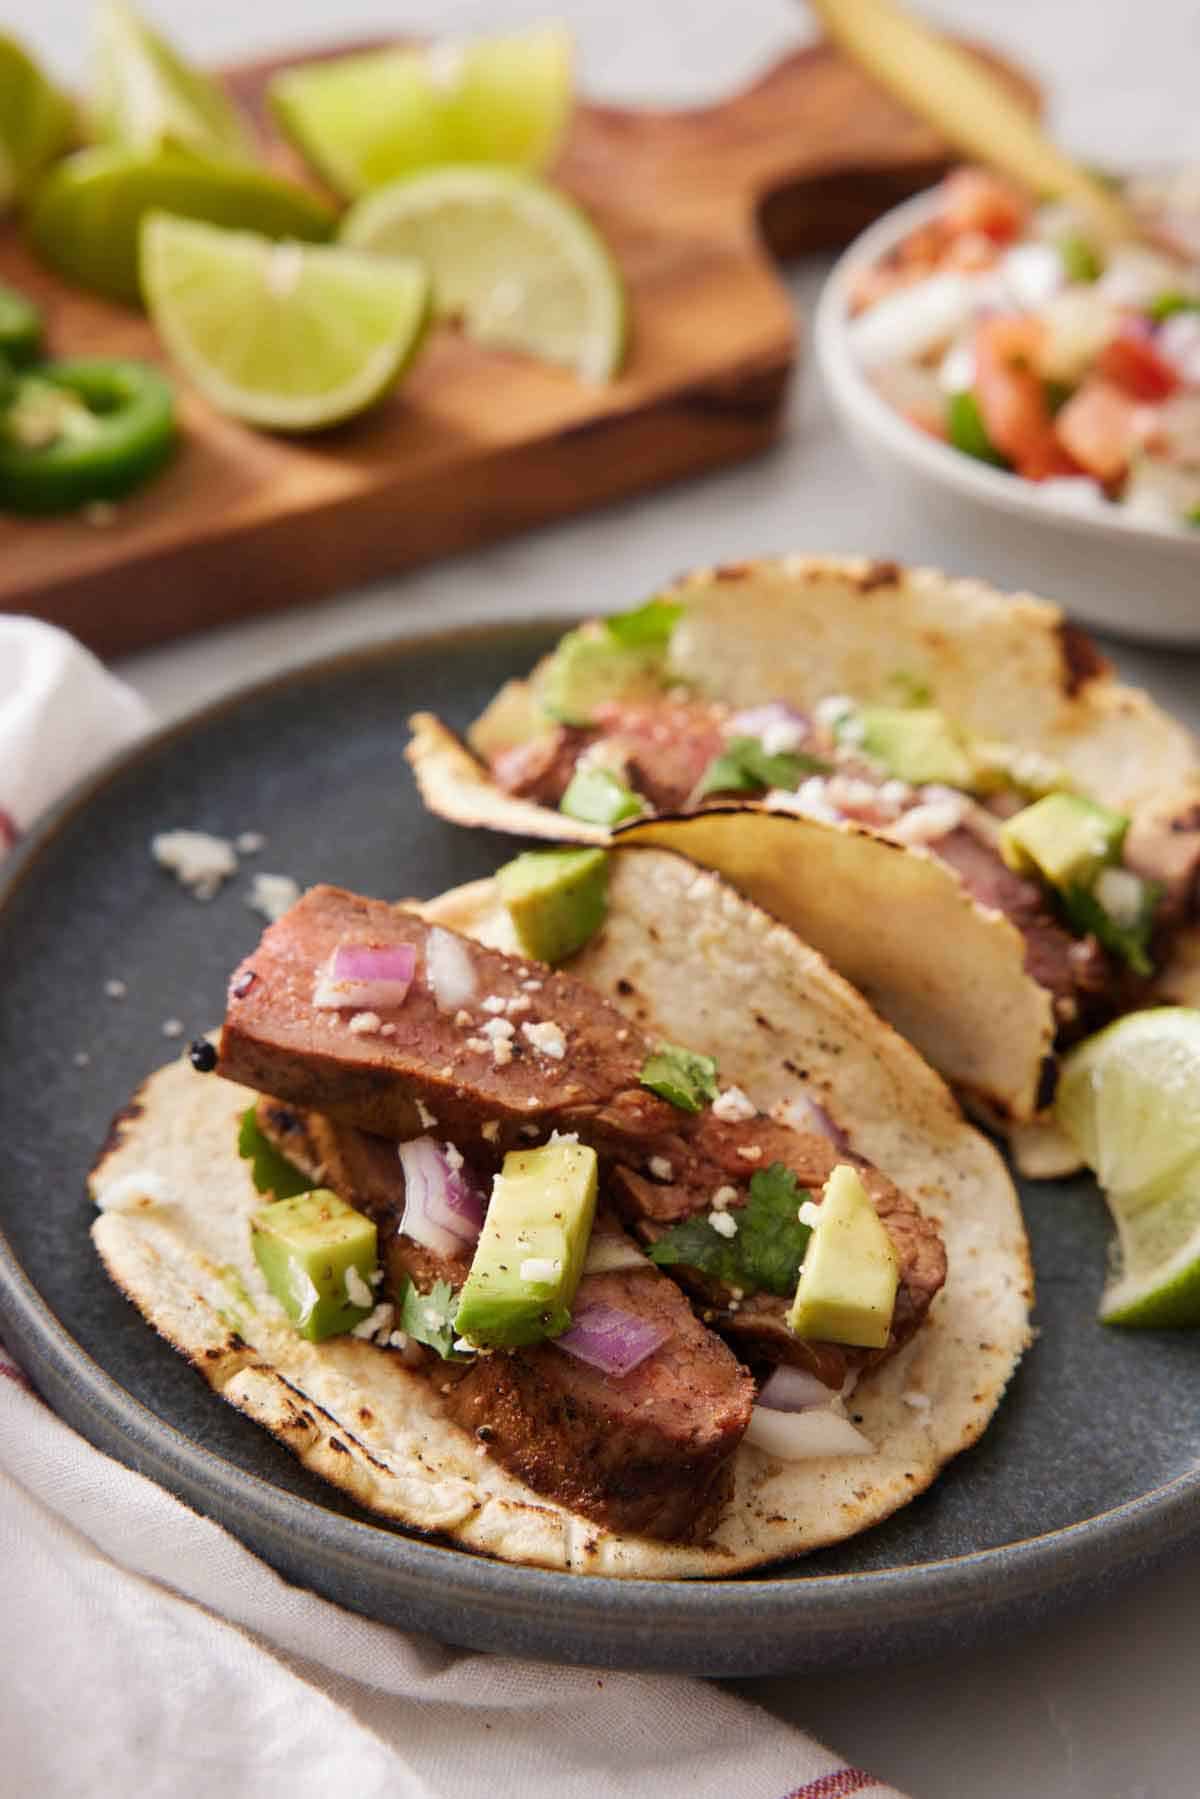 A close up view of a steak taco on a plate with a second one behind it. A bowl of salsa and cut limes in the background.